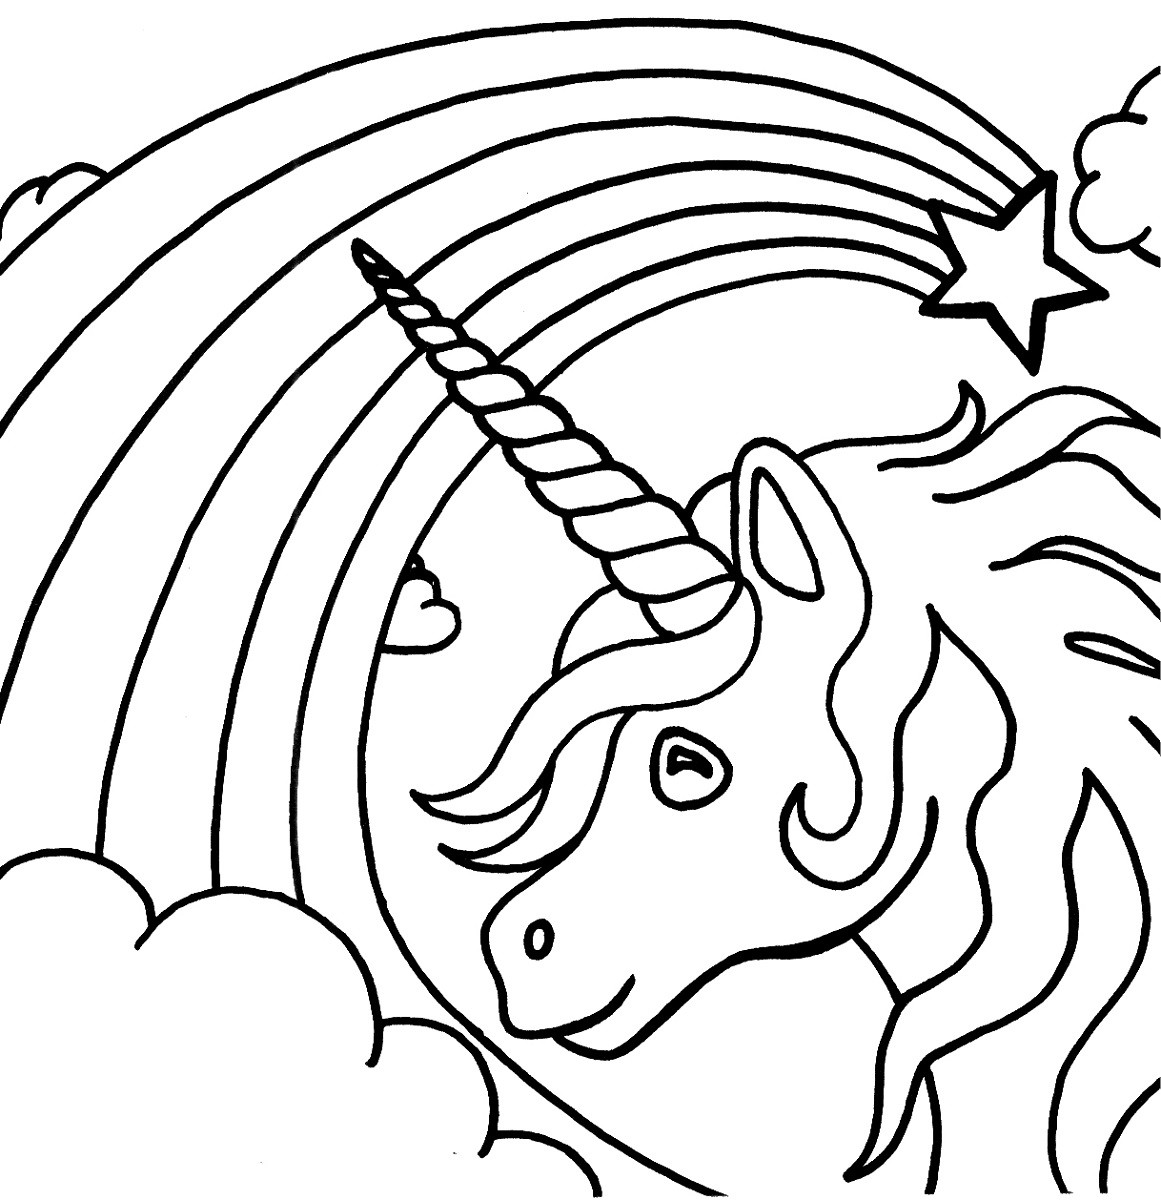 Coloring-Pages-Of-Cute-Unicorns-at-GetColorings.com-|-Free-...